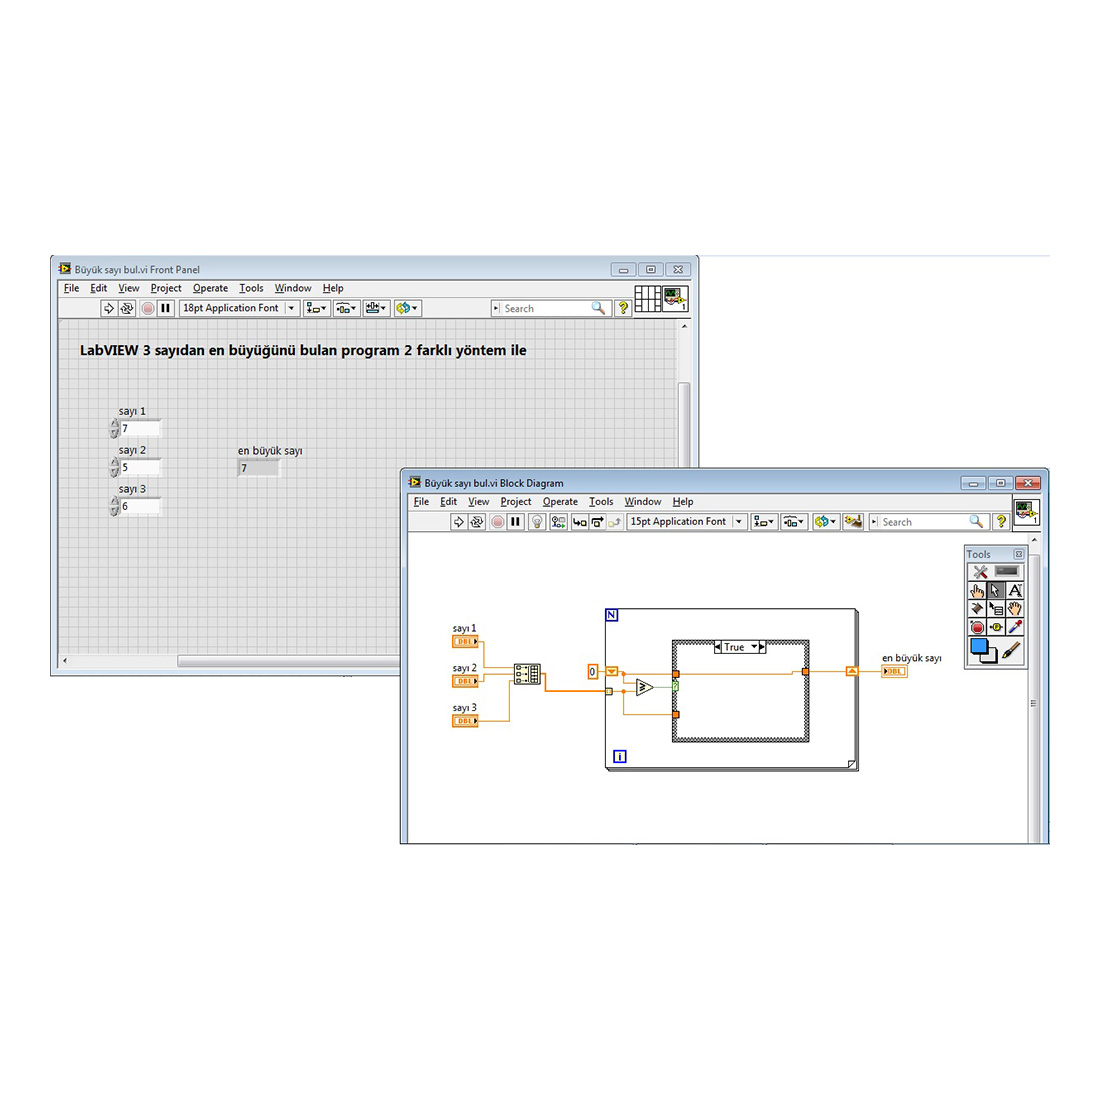 LabVIEW Program to Find Large Numbers with 2 Different Algorithms